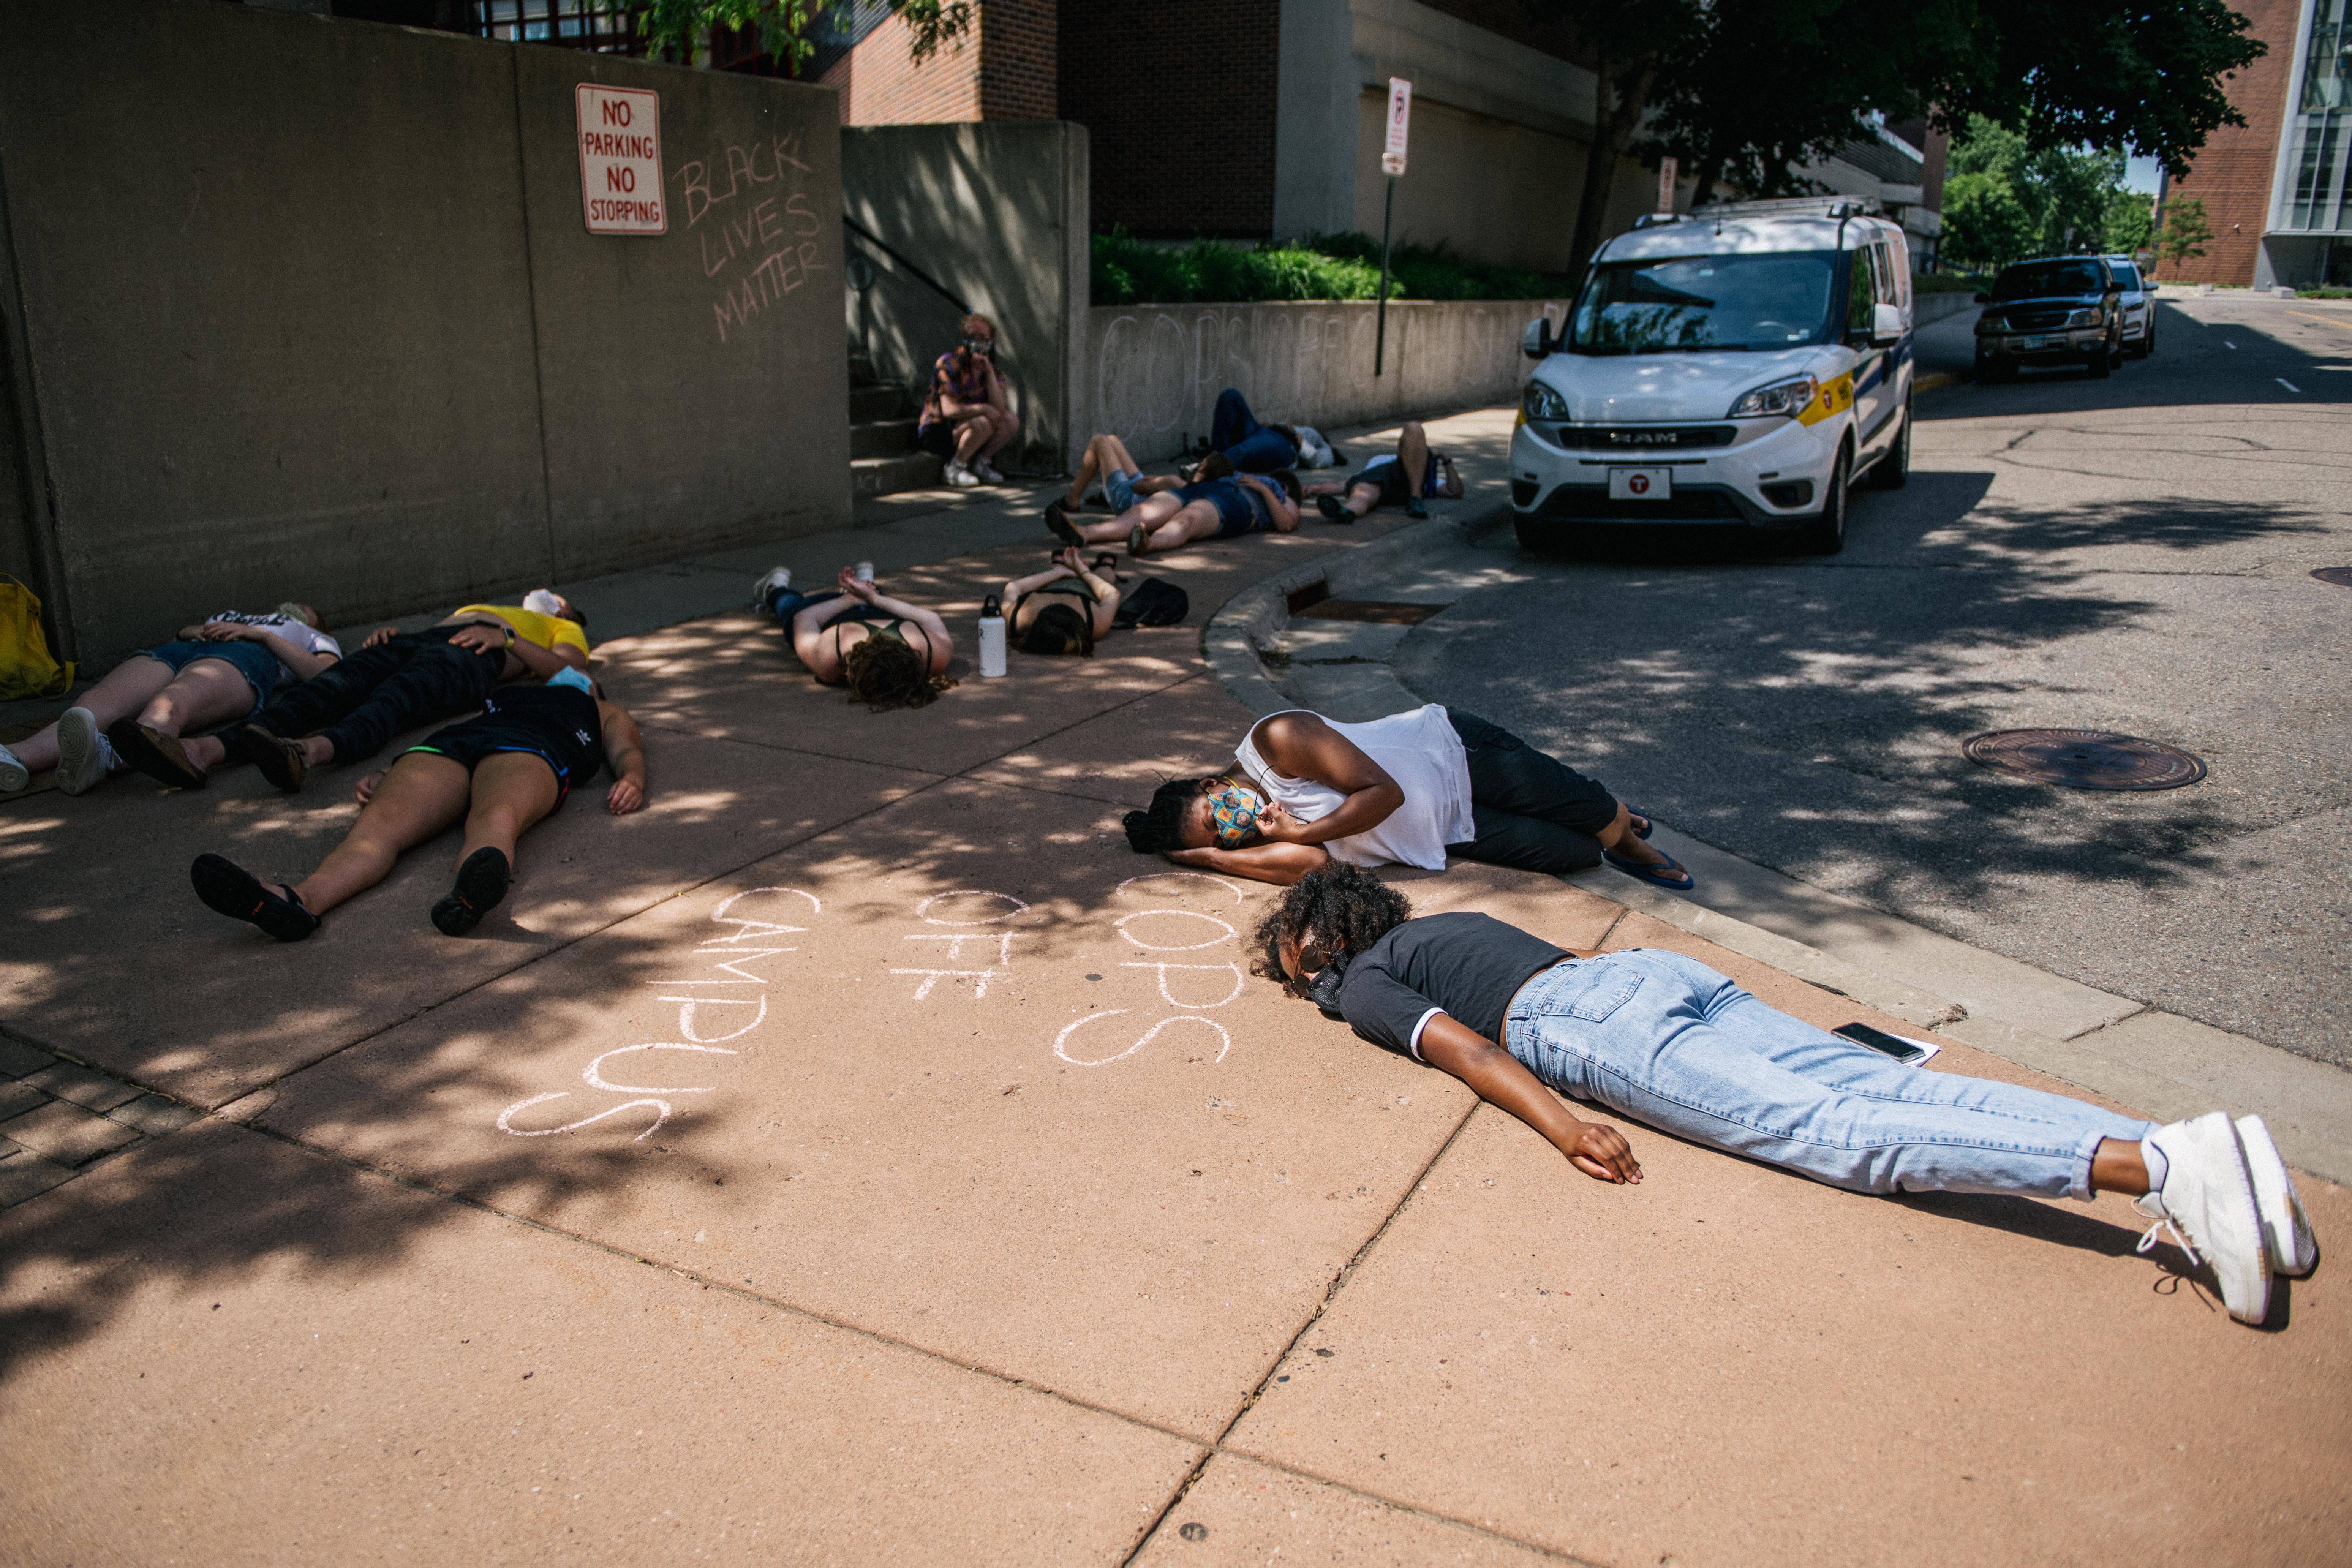 College students lying prostrate on a sidewalk in protest.